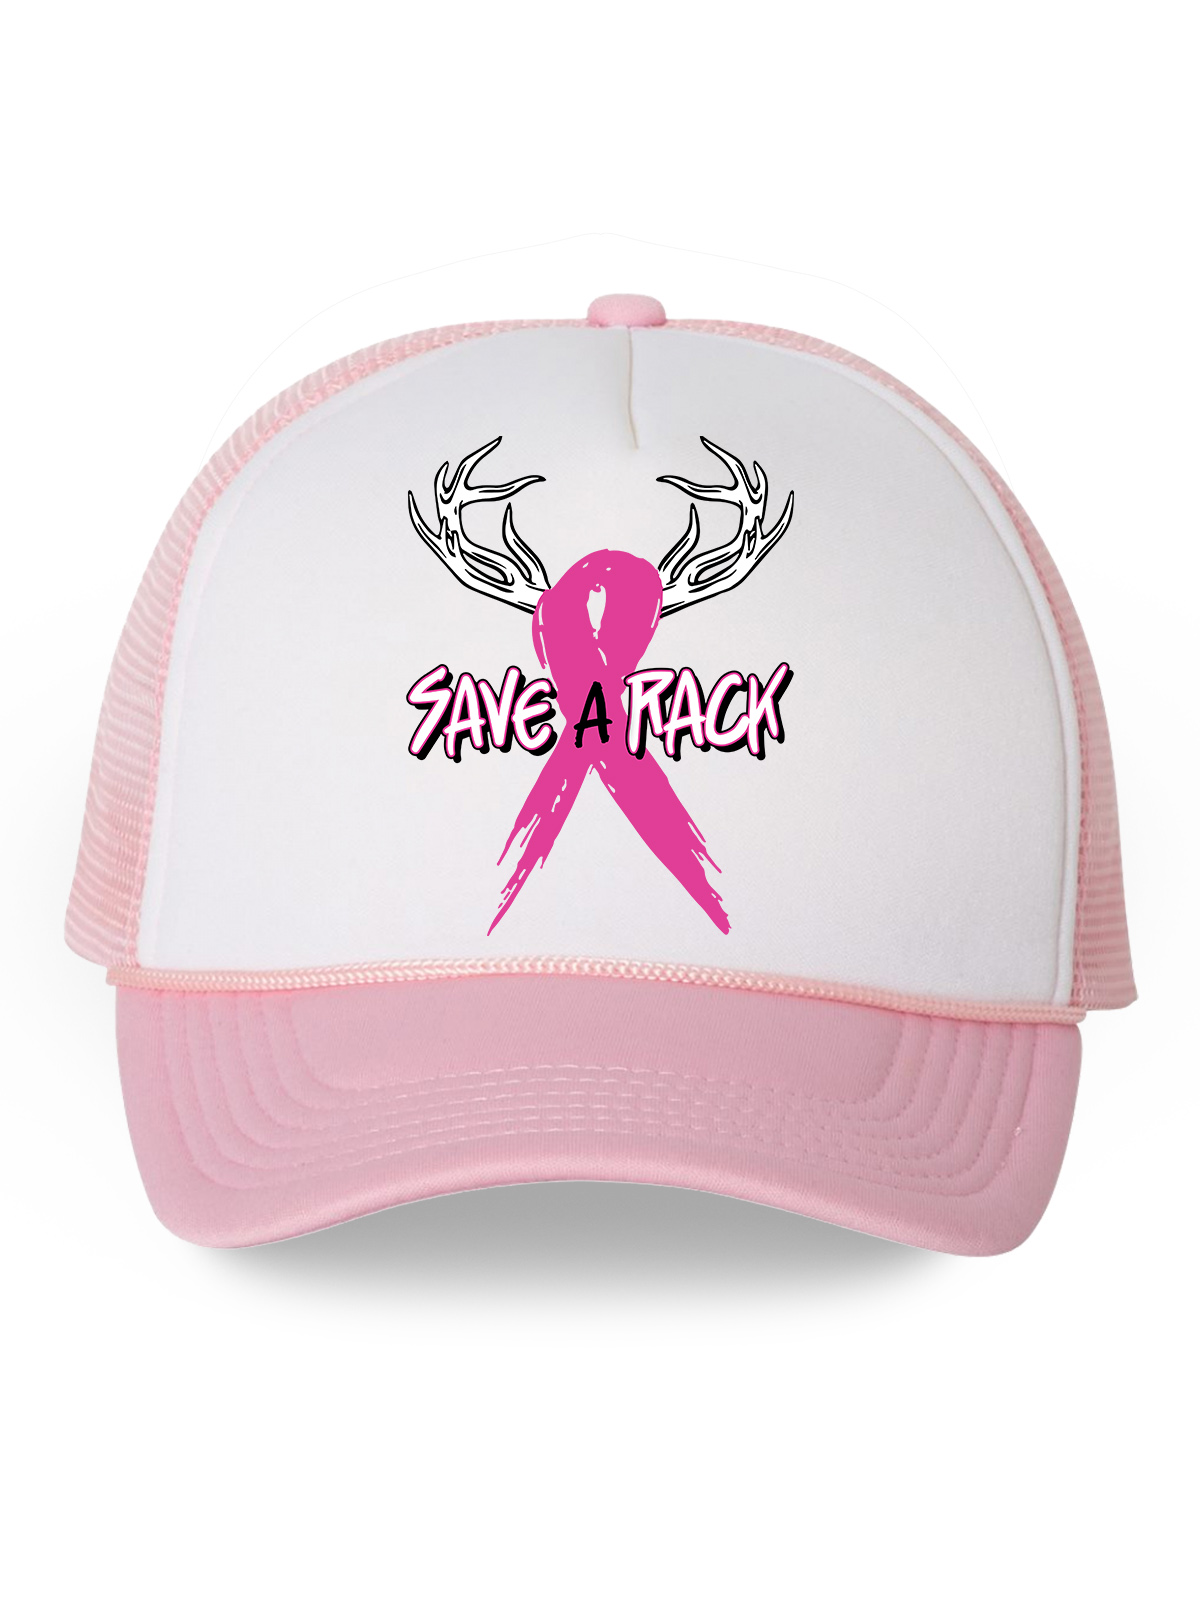 Awkward Styles Save A Rack Trucker Hat Breast Cancer Awareness Hats for Men and Women Pink Ribbon Baseball Hat Gifts for Cancer Survivor Cancer Awareness Headwear Breast Cancer Ribbon Dad Hat - image 1 of 6